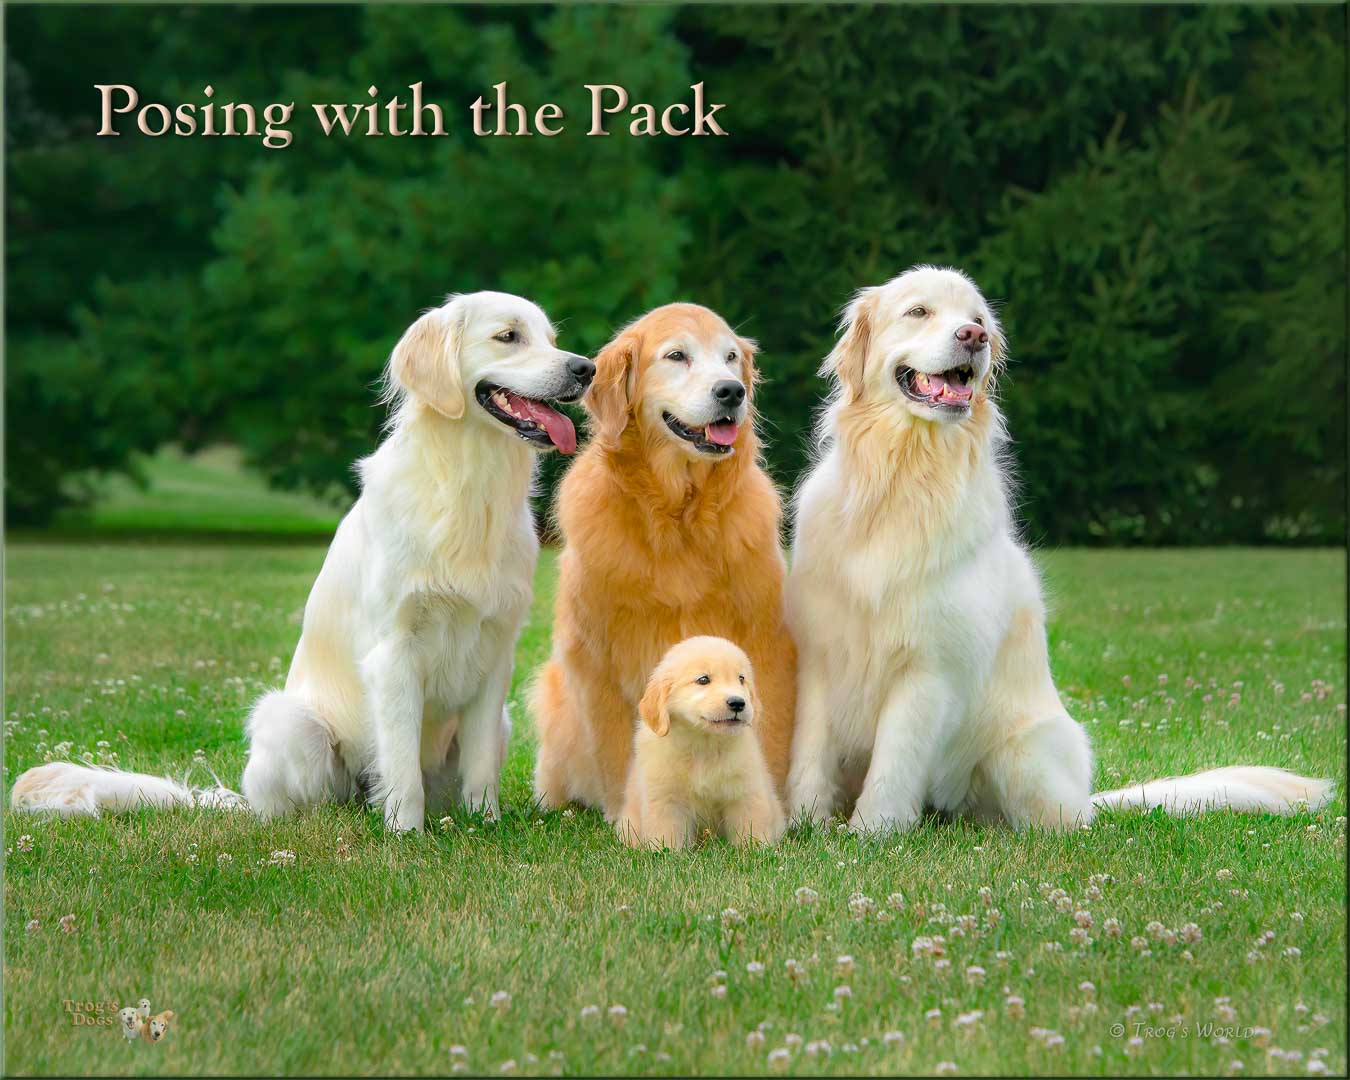 Four golden retrievers pose for a picture